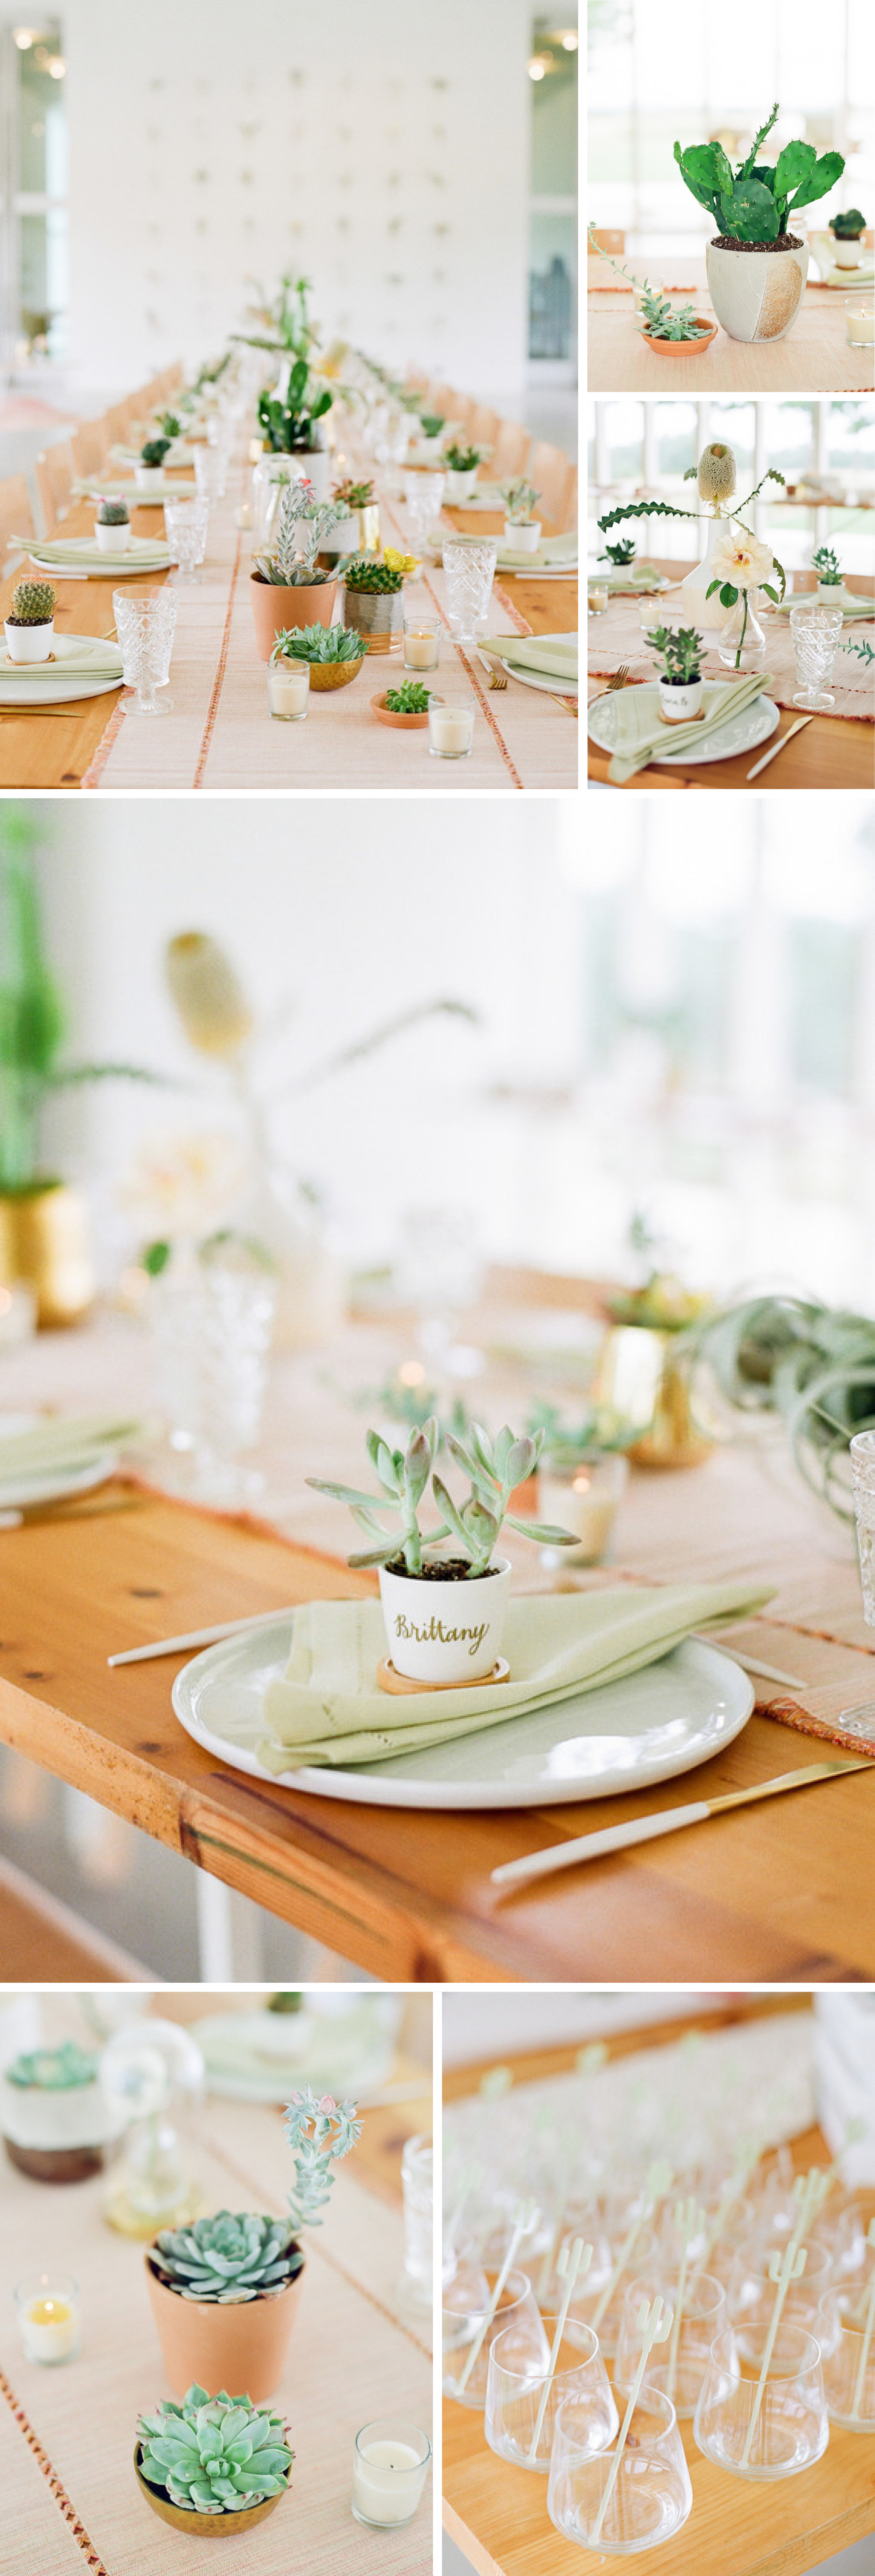 Adorable Cactus-Inspired Baby Shower